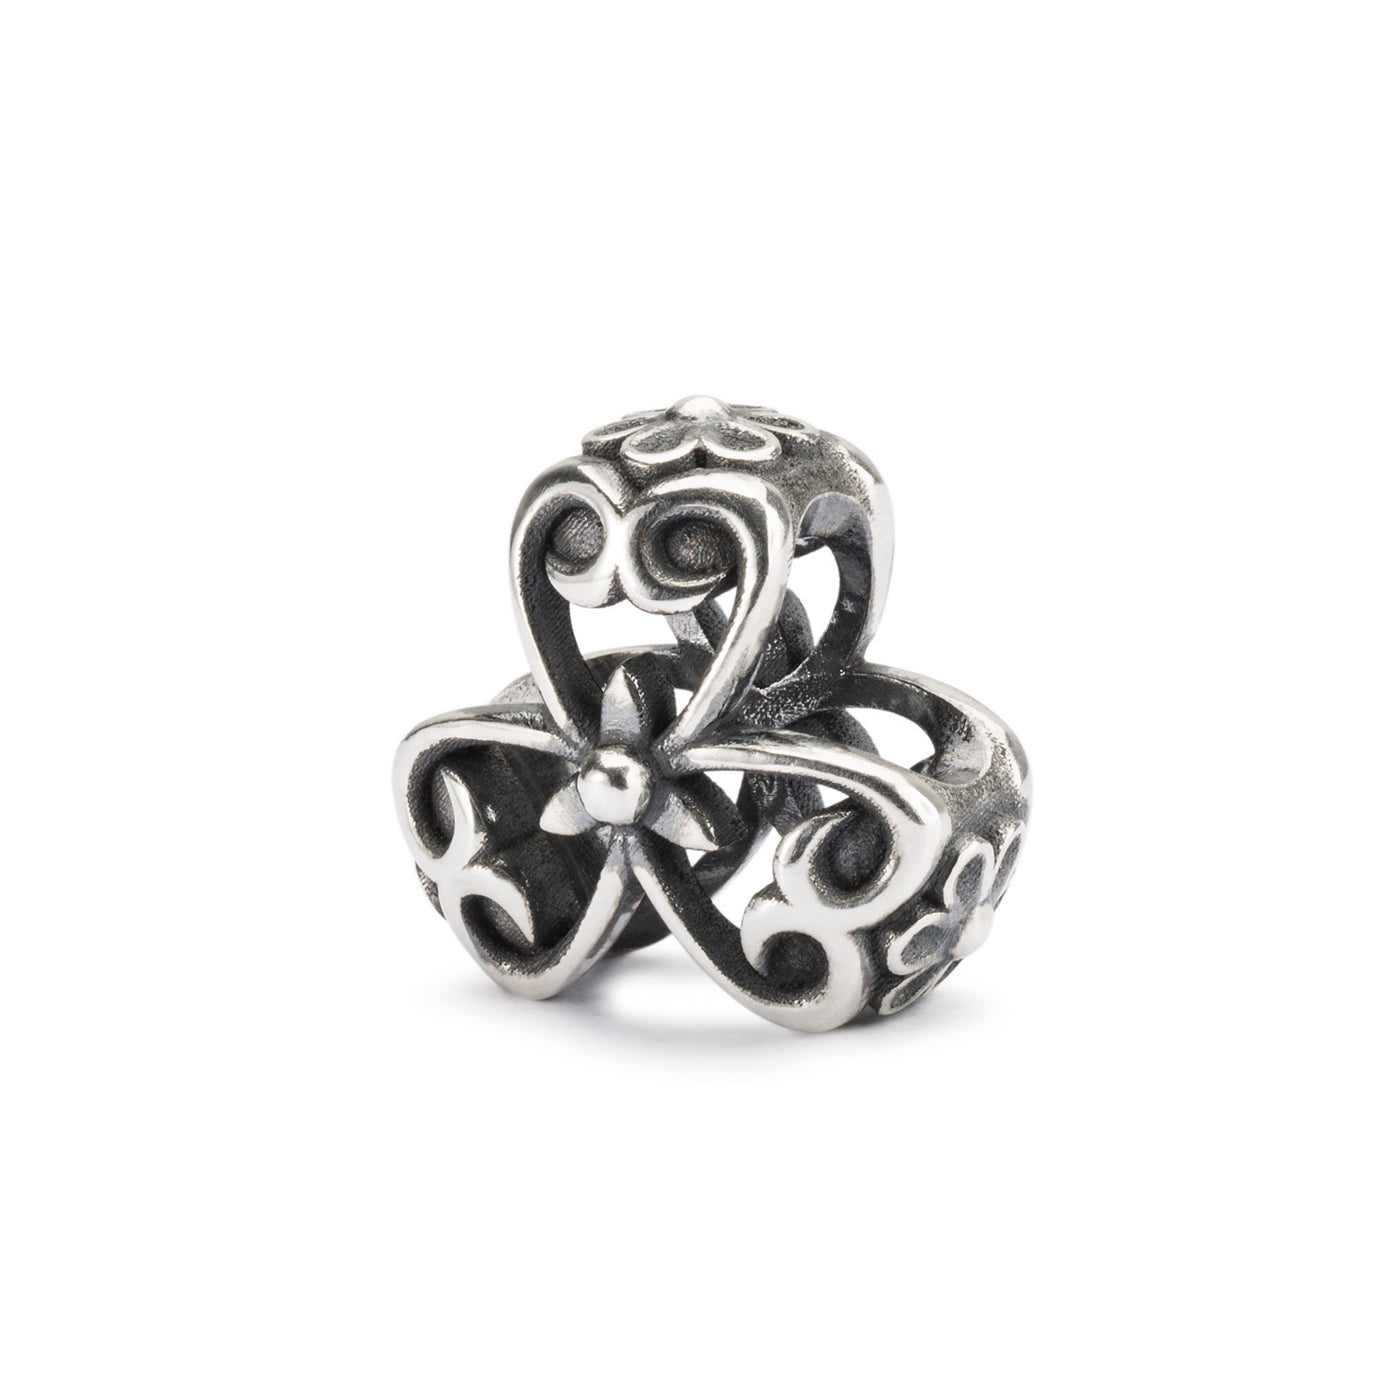 Silver Luck Bead with an intricate design featuring symbols of folklore and tradition, symbolizing knowledge and heritage.